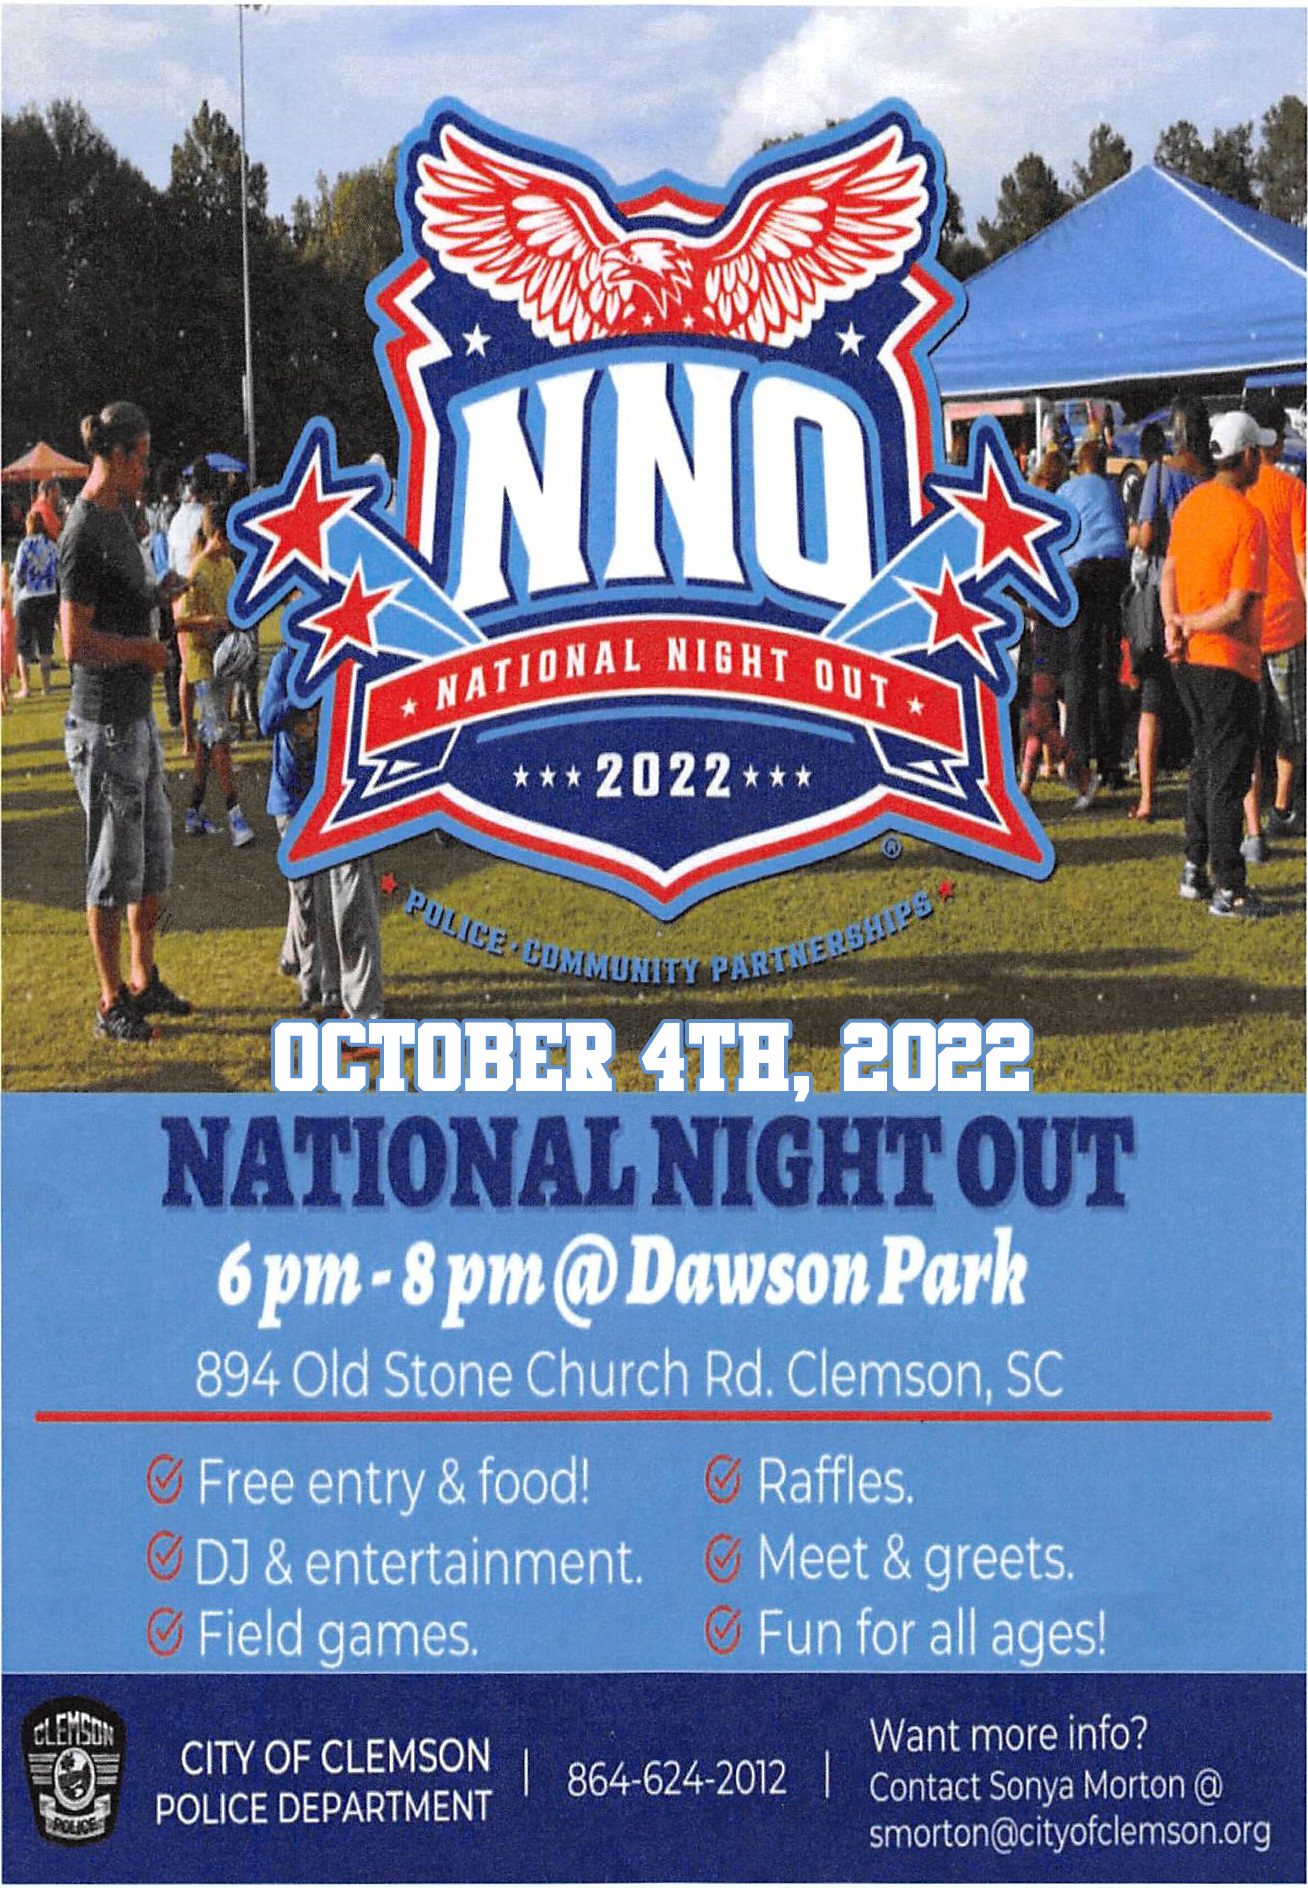 National Night Out October 4, 2022 at Dawson Park